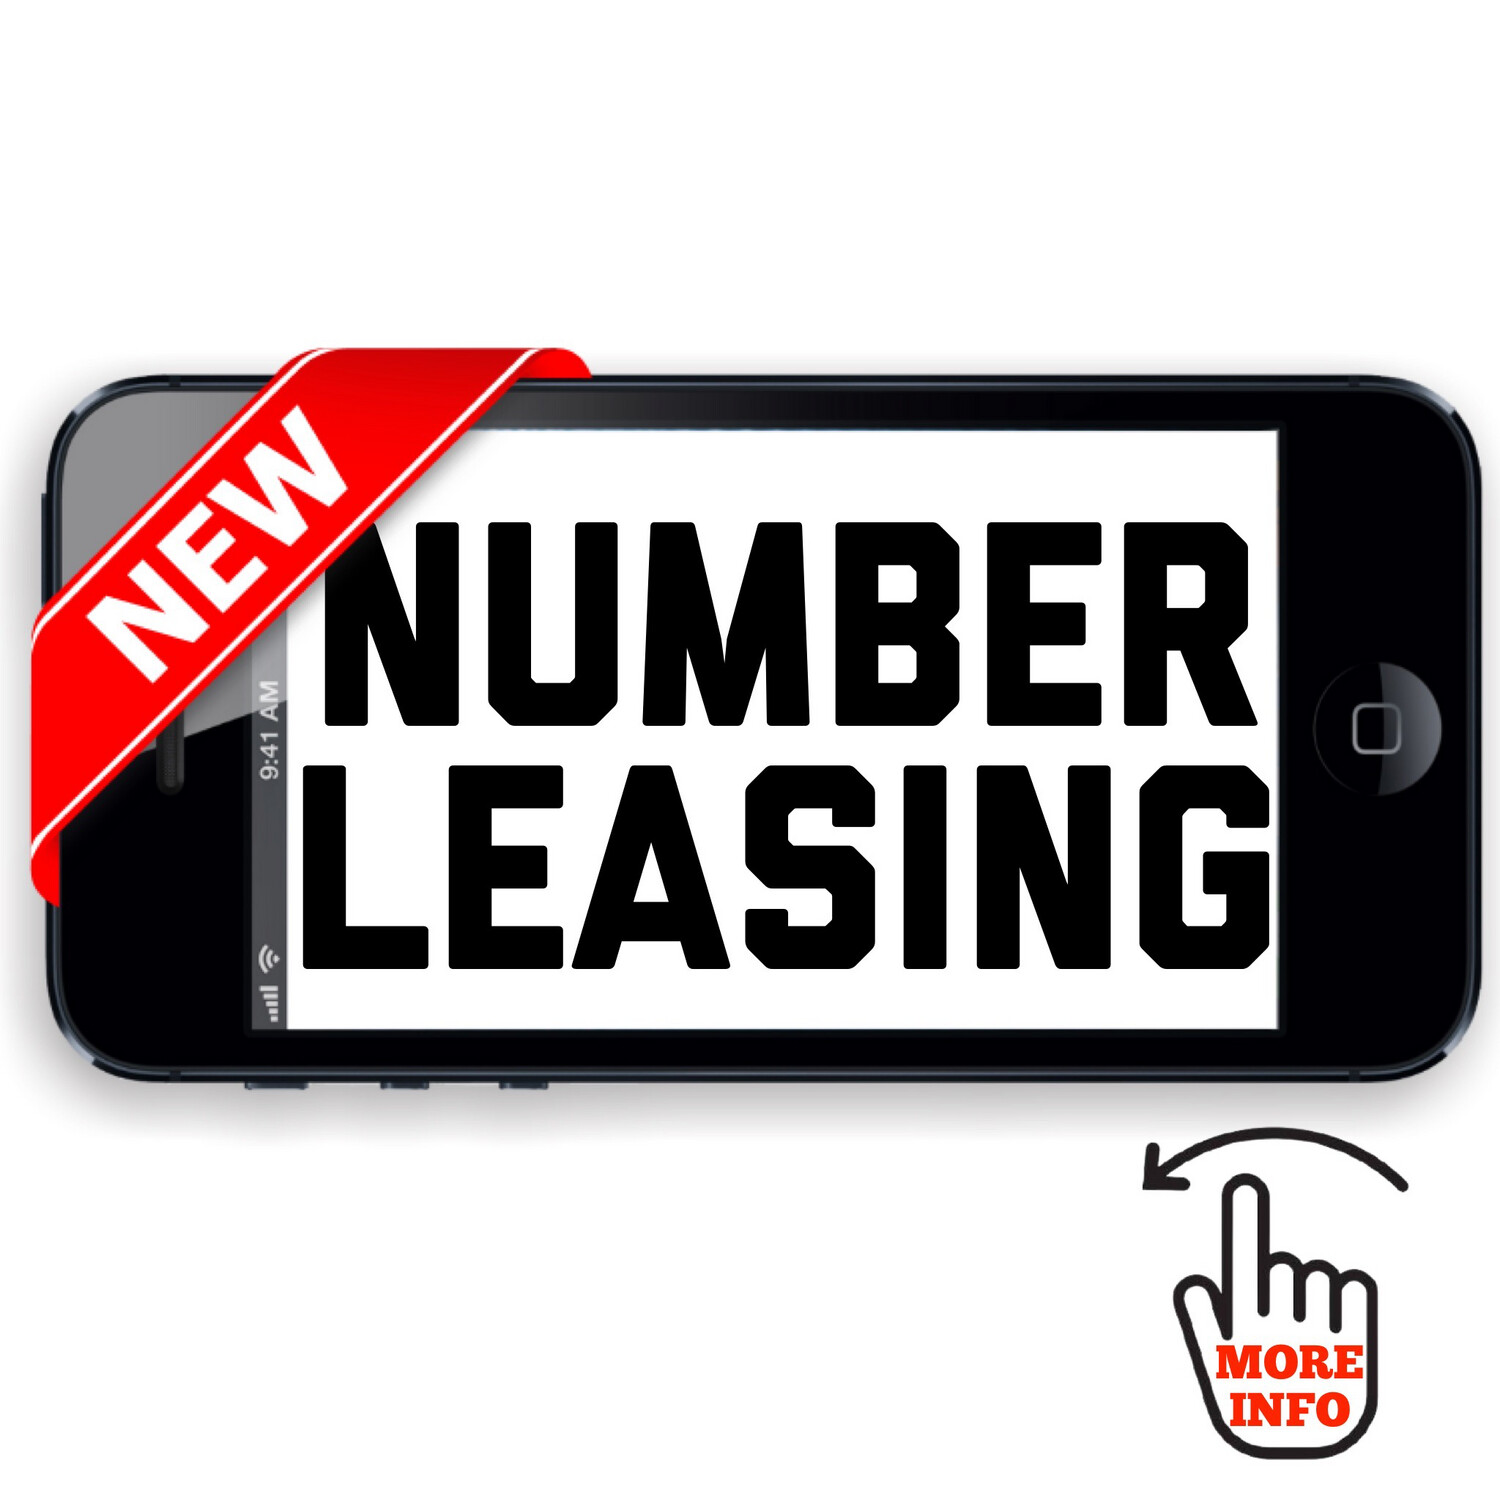 Number Leasing